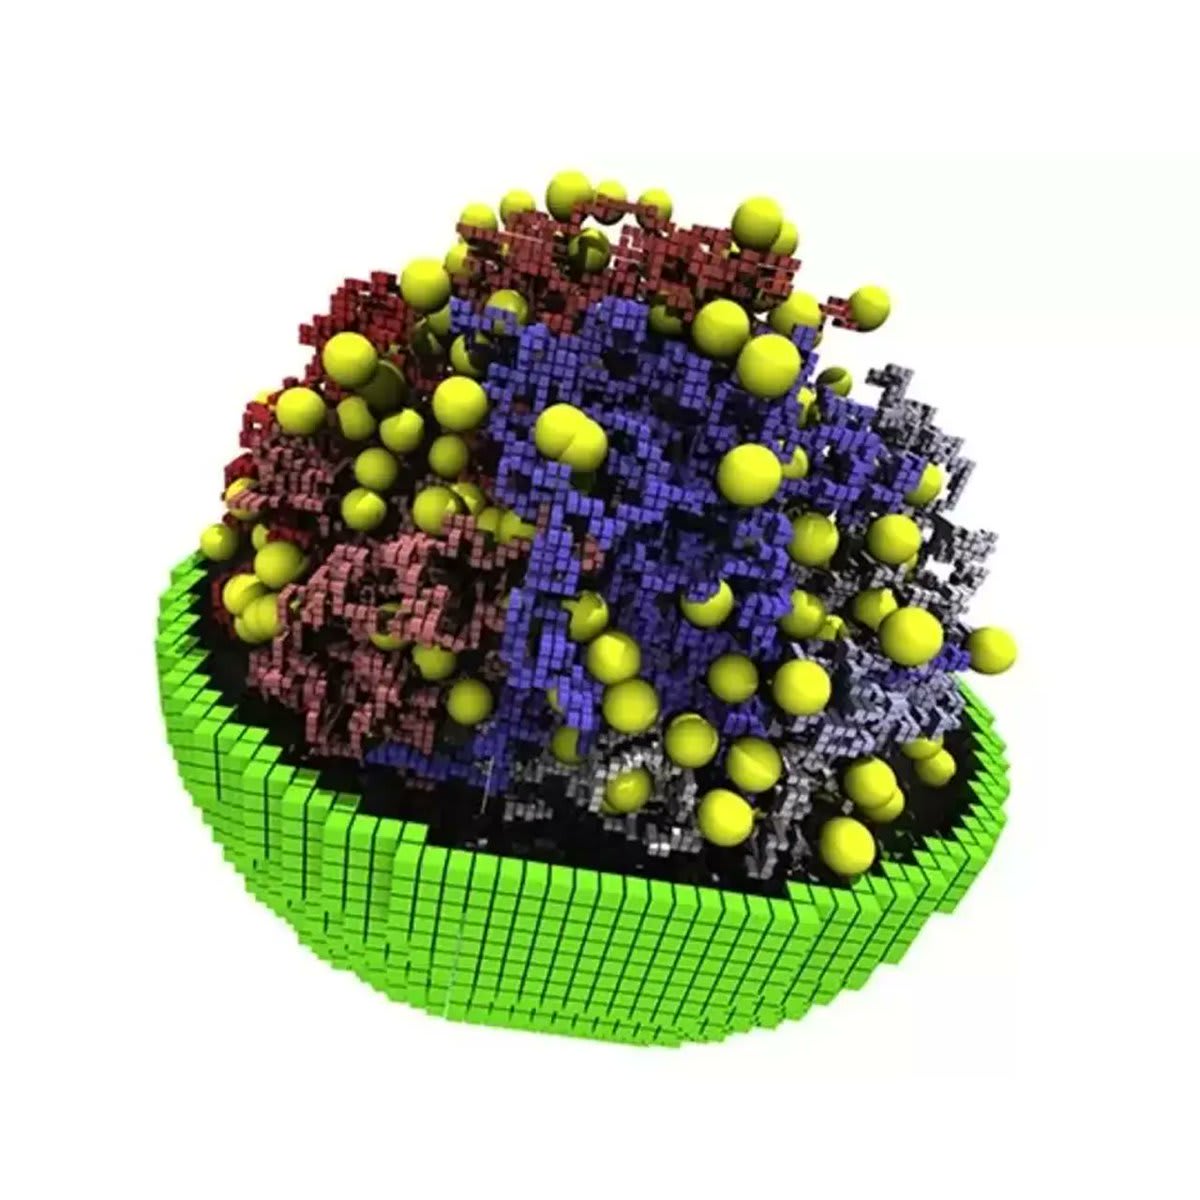 Is it just us, or does this model of a simplified cell look like a delicious cupcake?  This three-dimensional, fully dynamic kinetic model of a living minimal cell mimics what goes on in the actual cell. More here: https://t.co/YVMrj41Eu6  Luthey-Schulten et al 2022